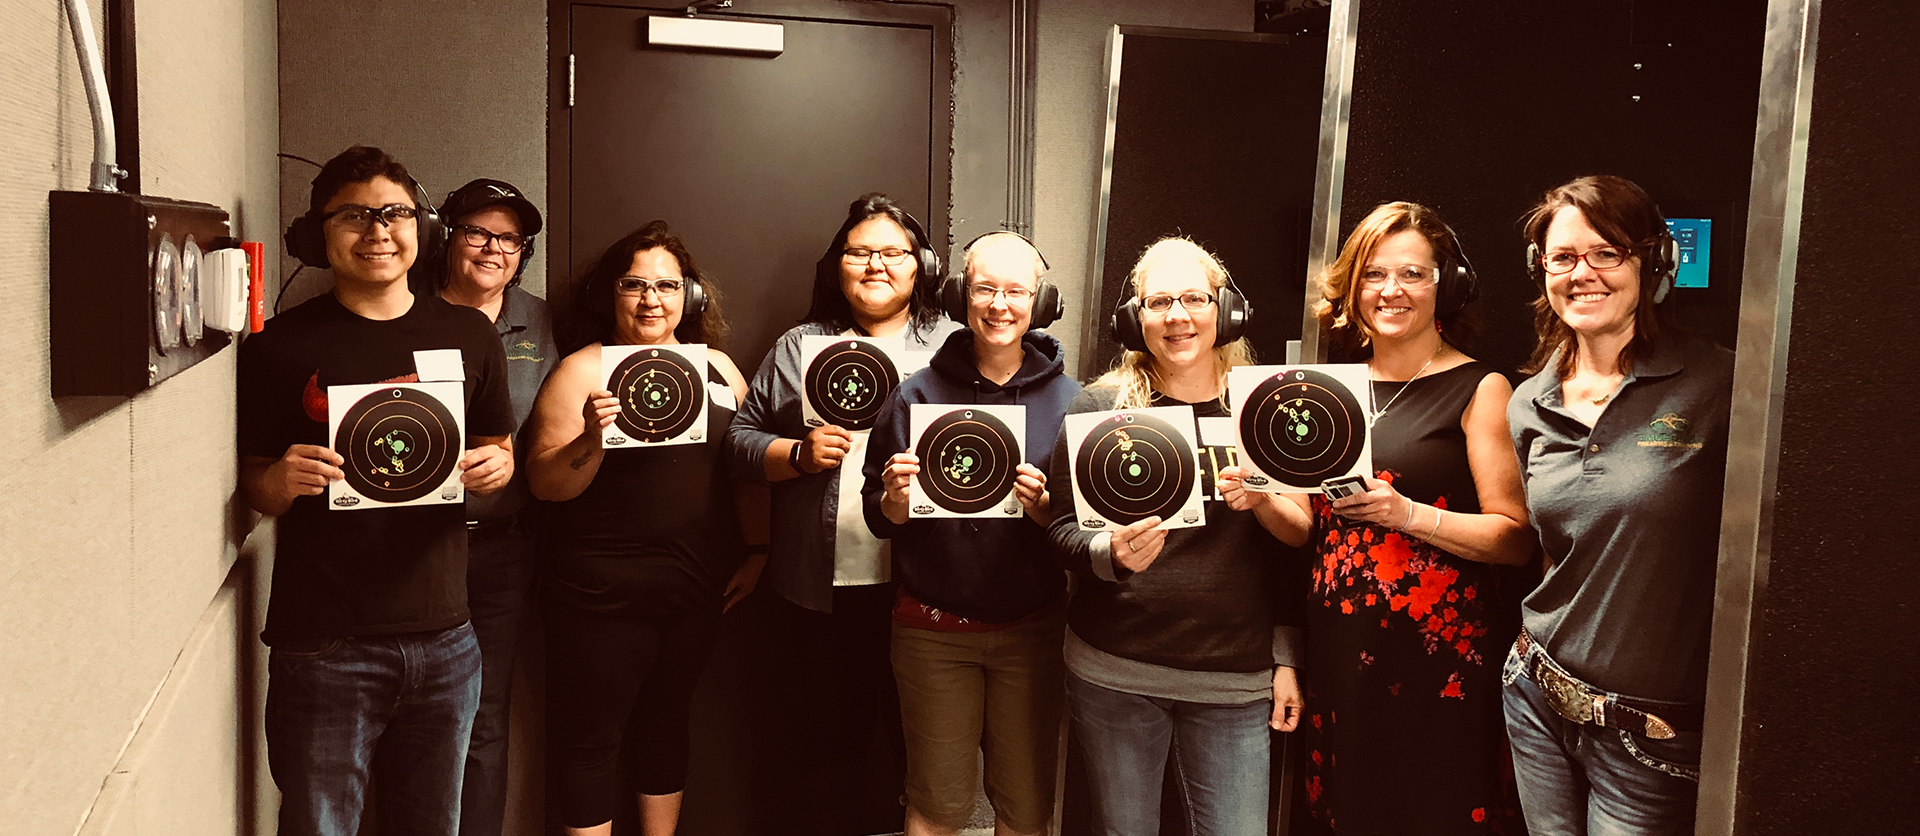 Women shooters with targets at Timberline Firearms